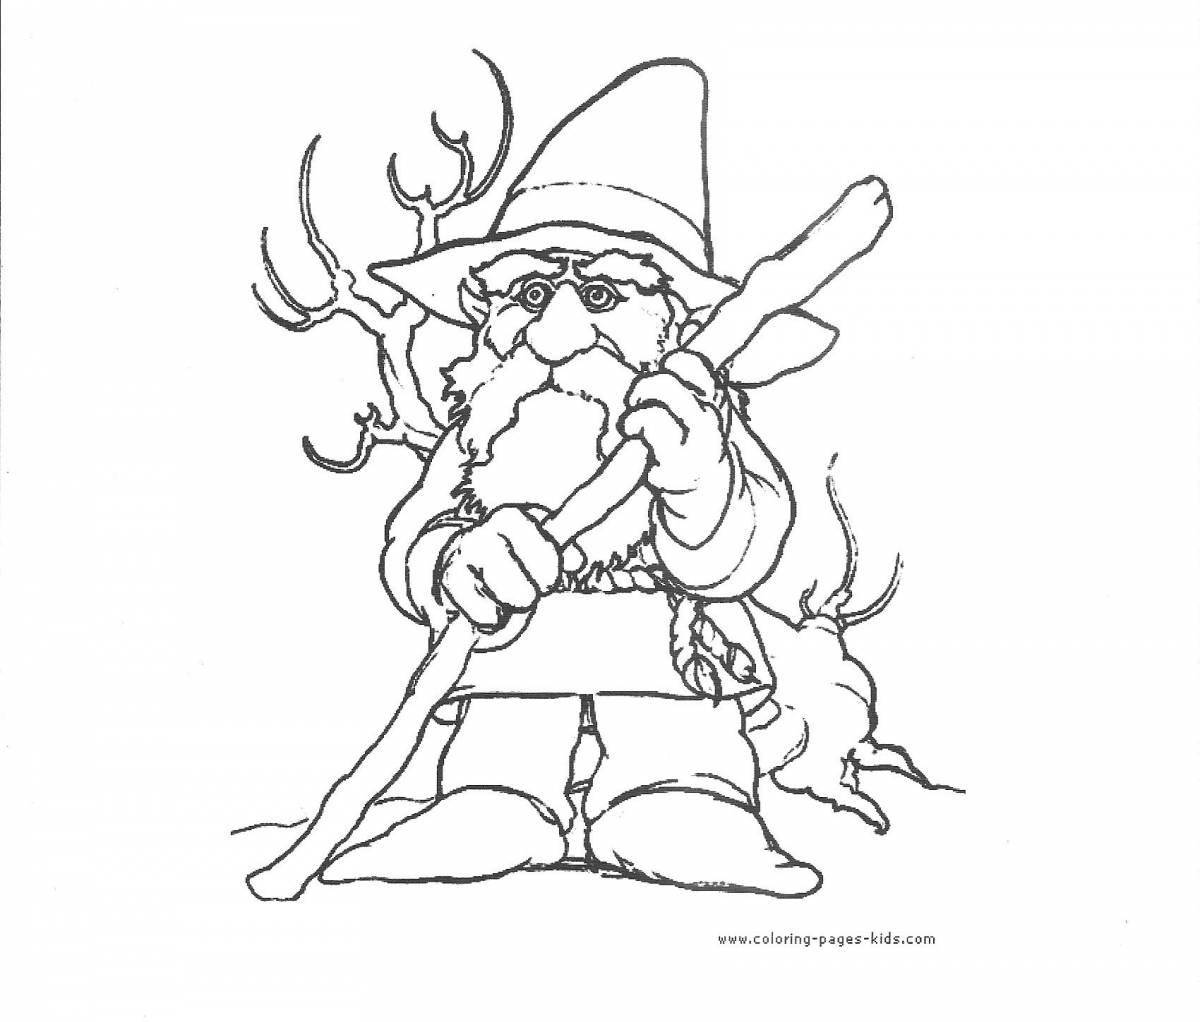 Playful Goblin Coloring Page for Toddlers